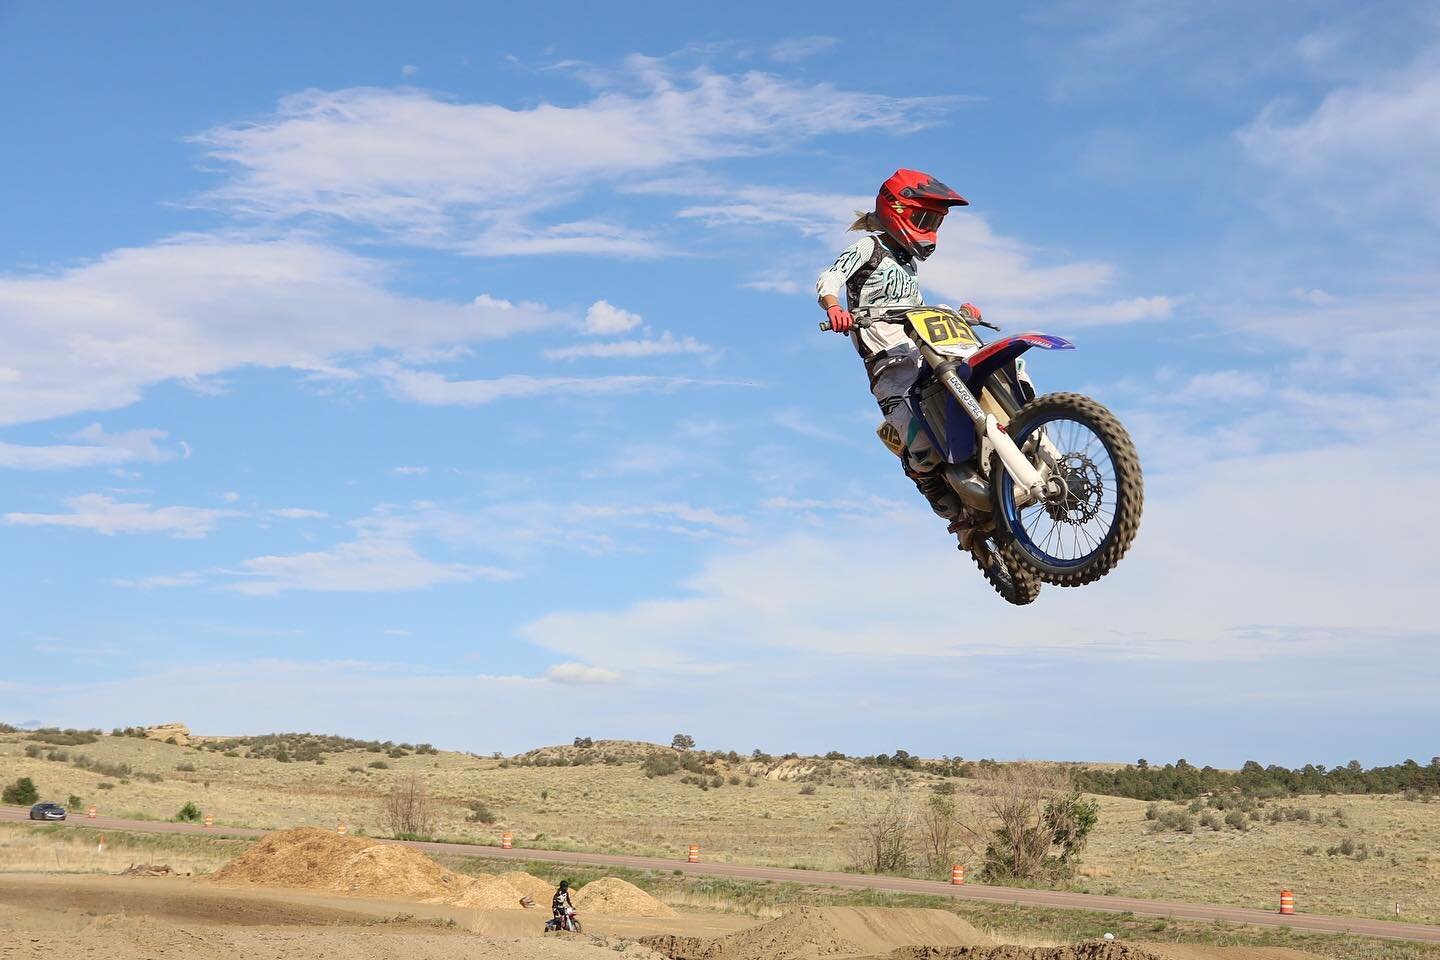 You&rsquo;re wings already exist, all you have to do is fly.

#toosday sesh this week is at @ramoffroadpark 8/23 4-dark. Please register online (link in bio) and LET&rsquo;S RIDE! 

#GRT #girlsridetoo #community #empoweredondirt #moto #womenwhoride #